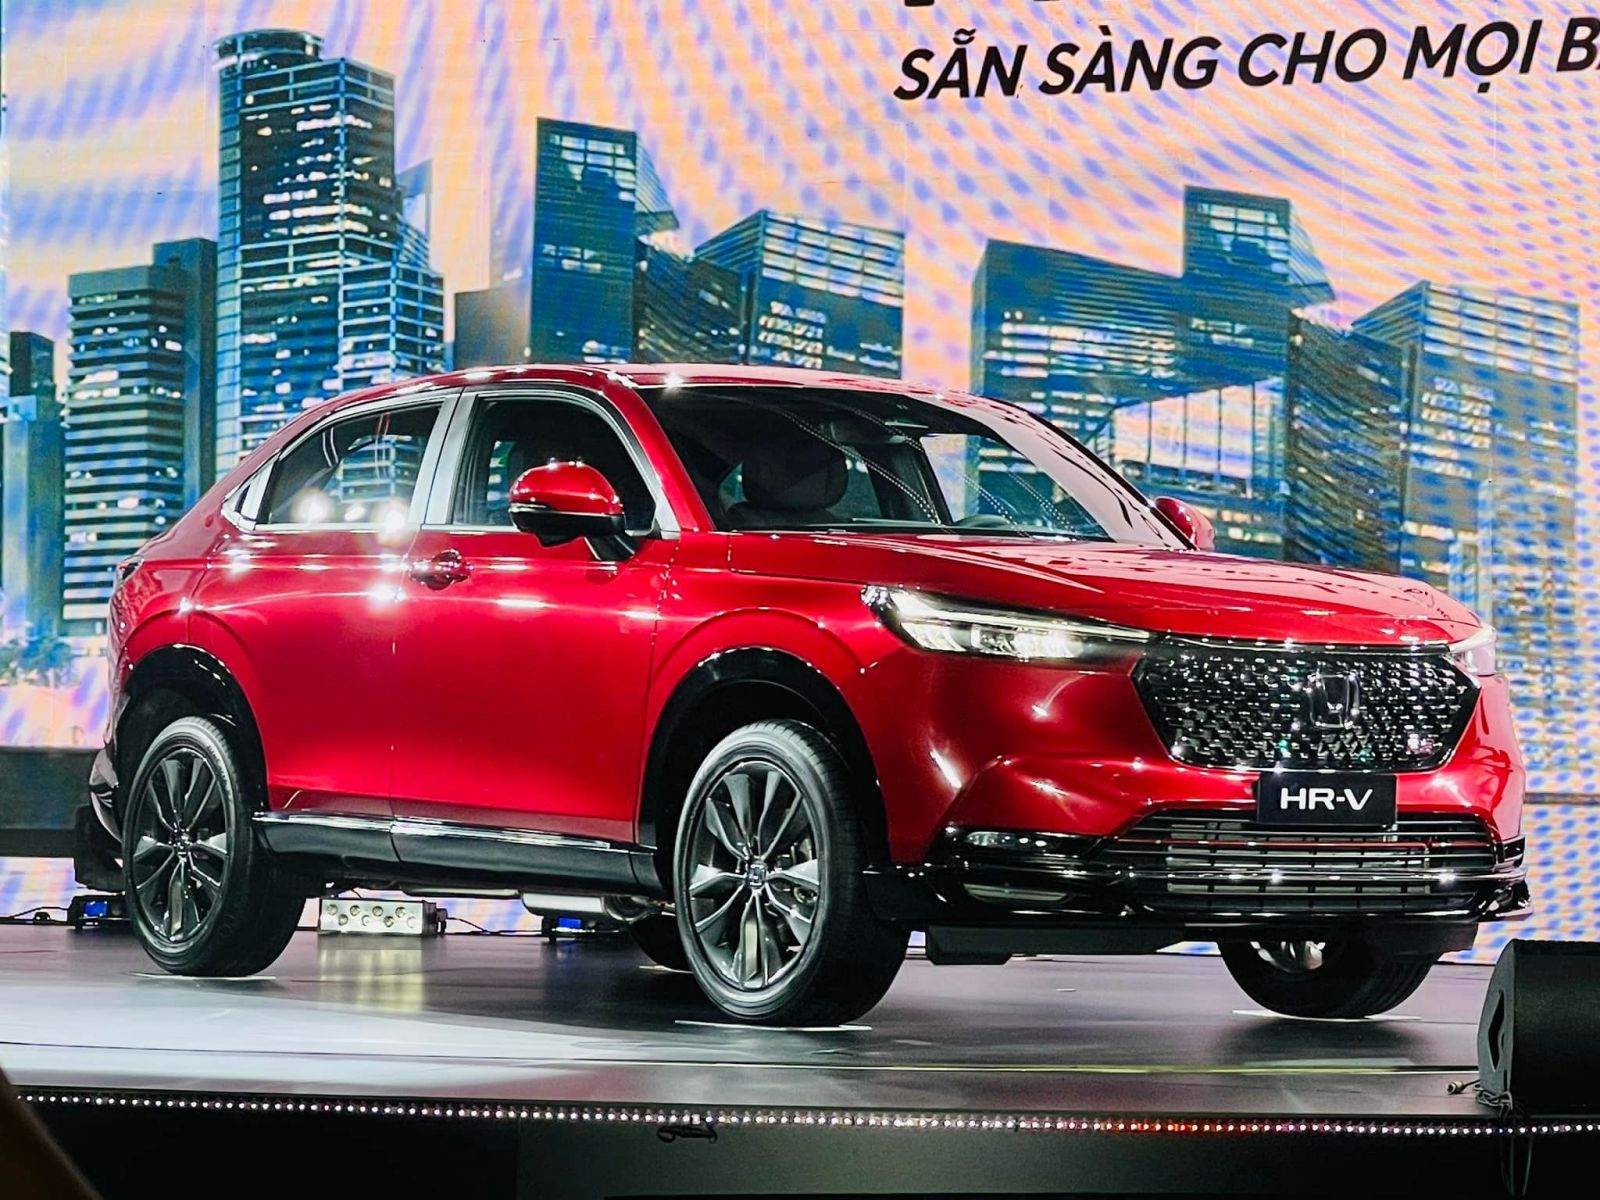 The dealer revealed that Honda HRV 2022 has 2 versions with the expected price from 720 million VND to be launched next month against the king of sales Kia Seltos